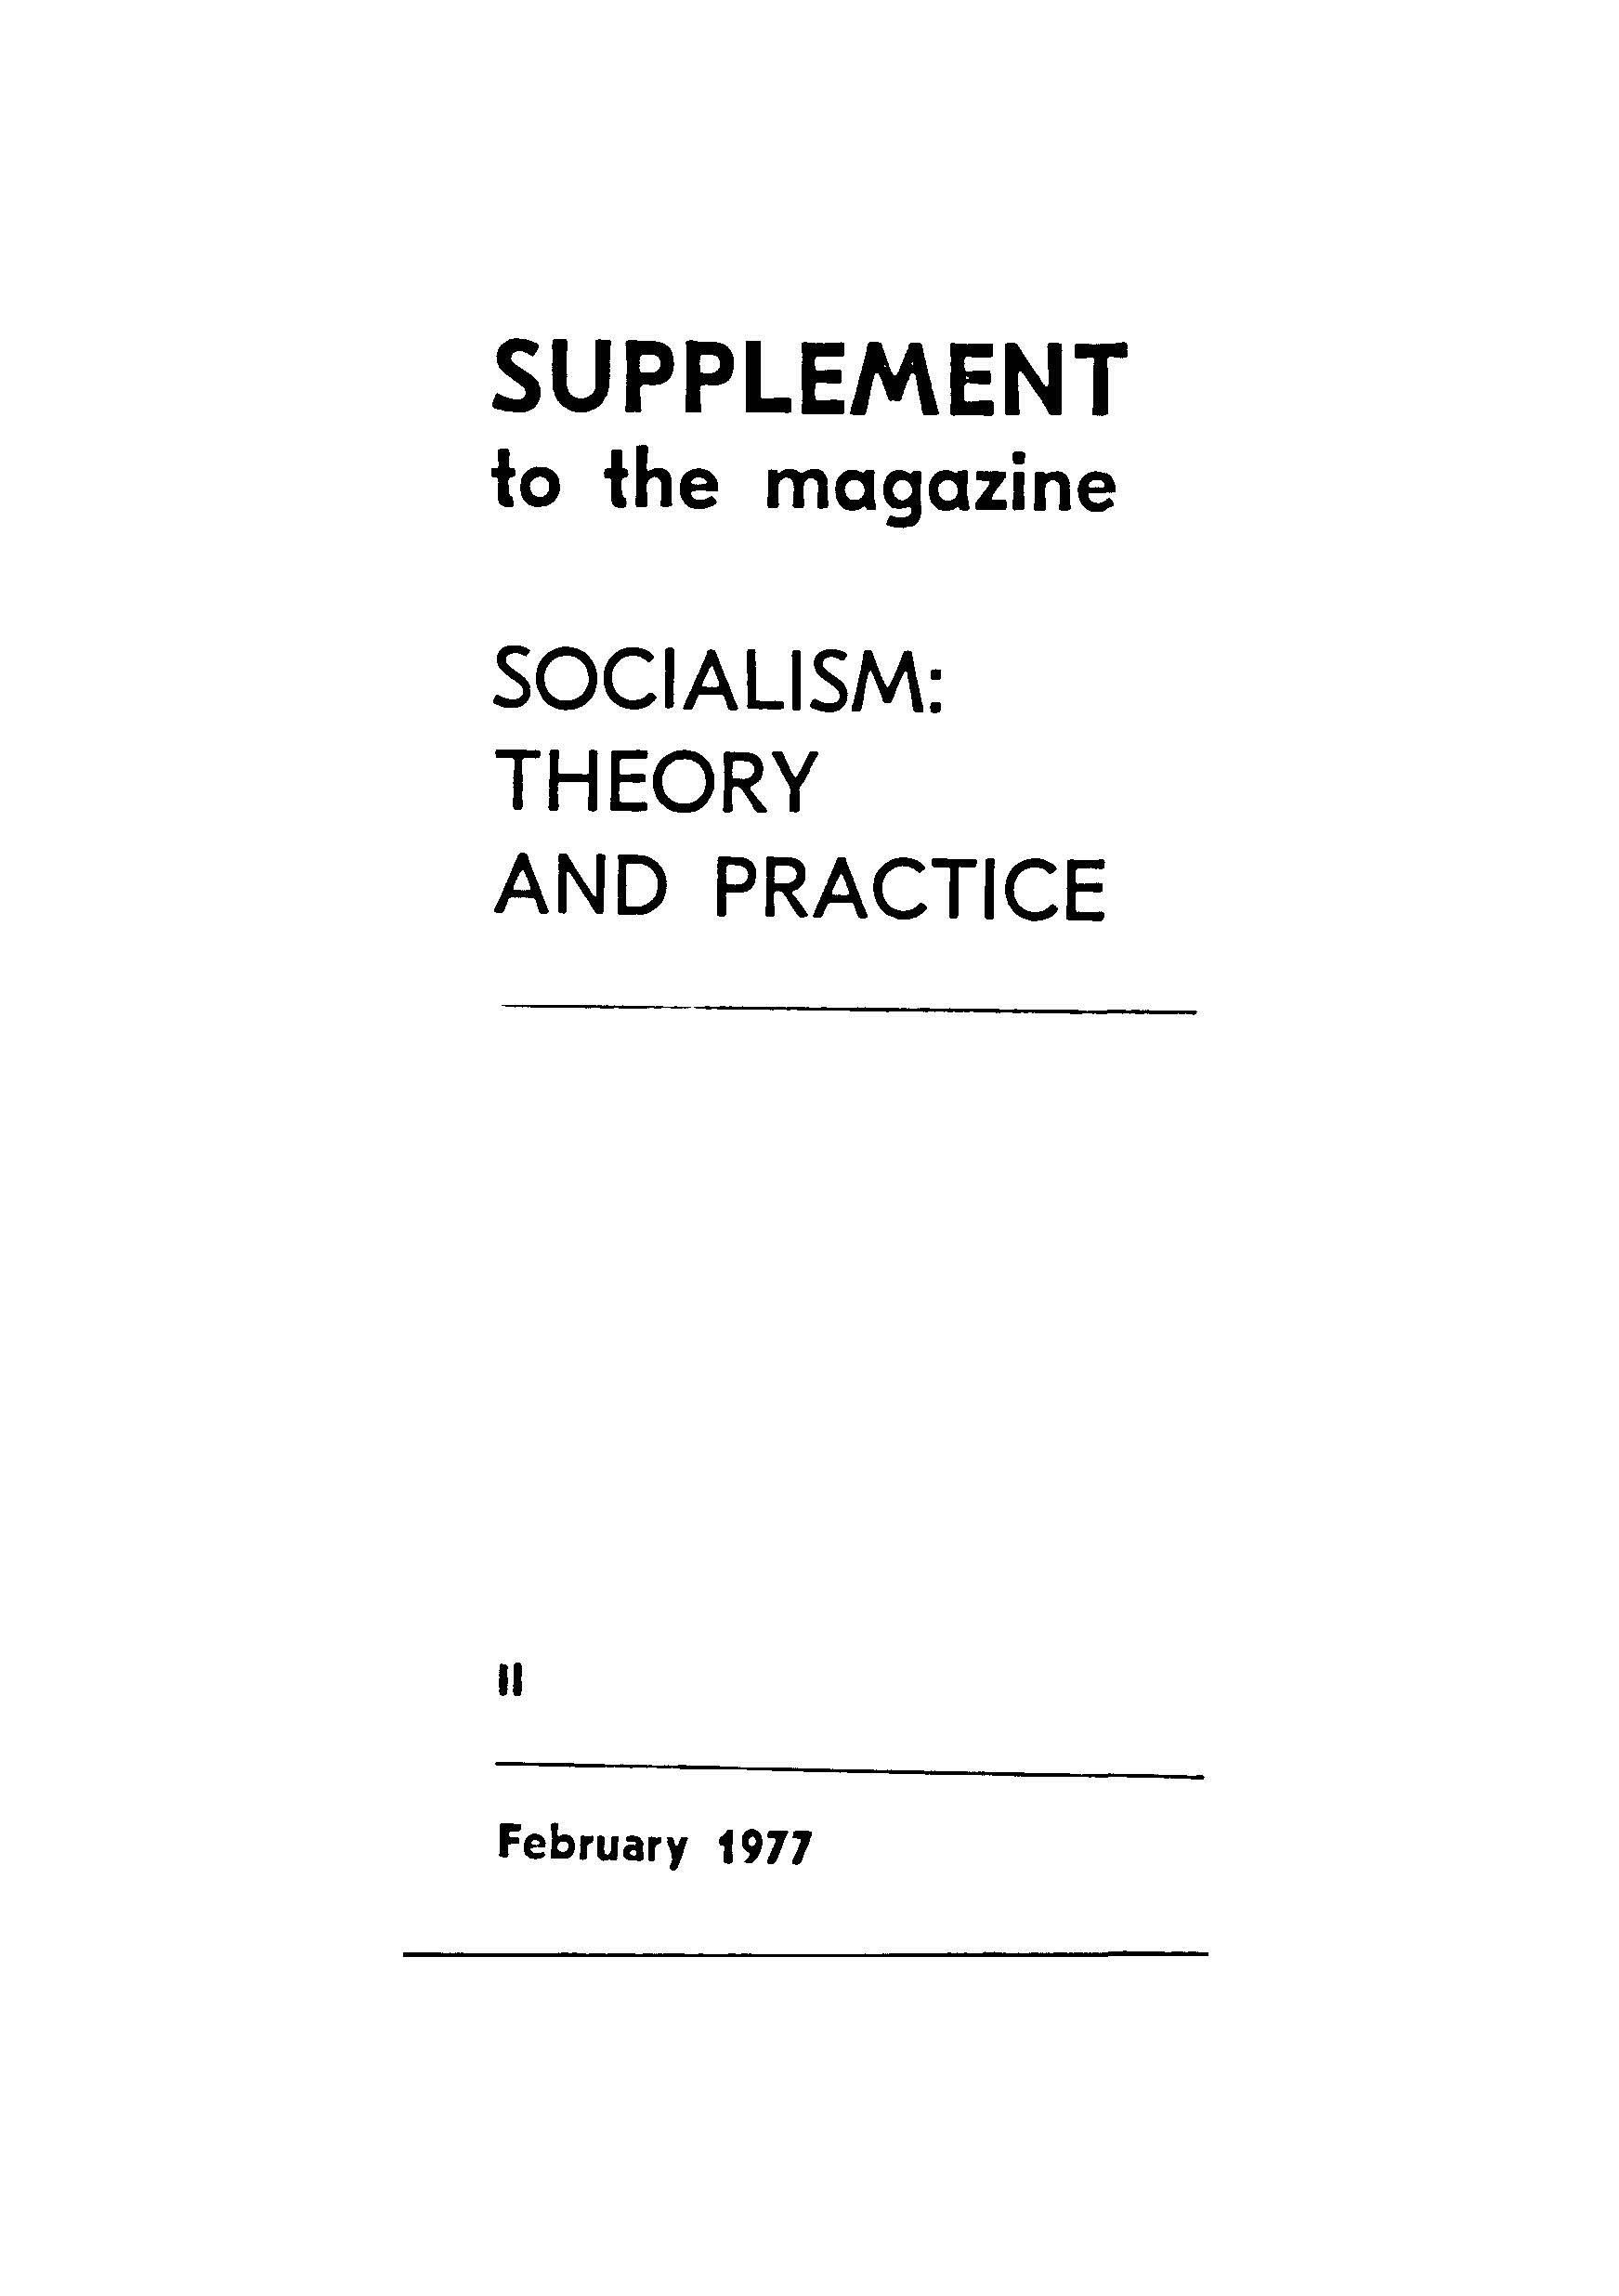 Supplement to the magazine socialism:theory and practice (february-ll 1977)